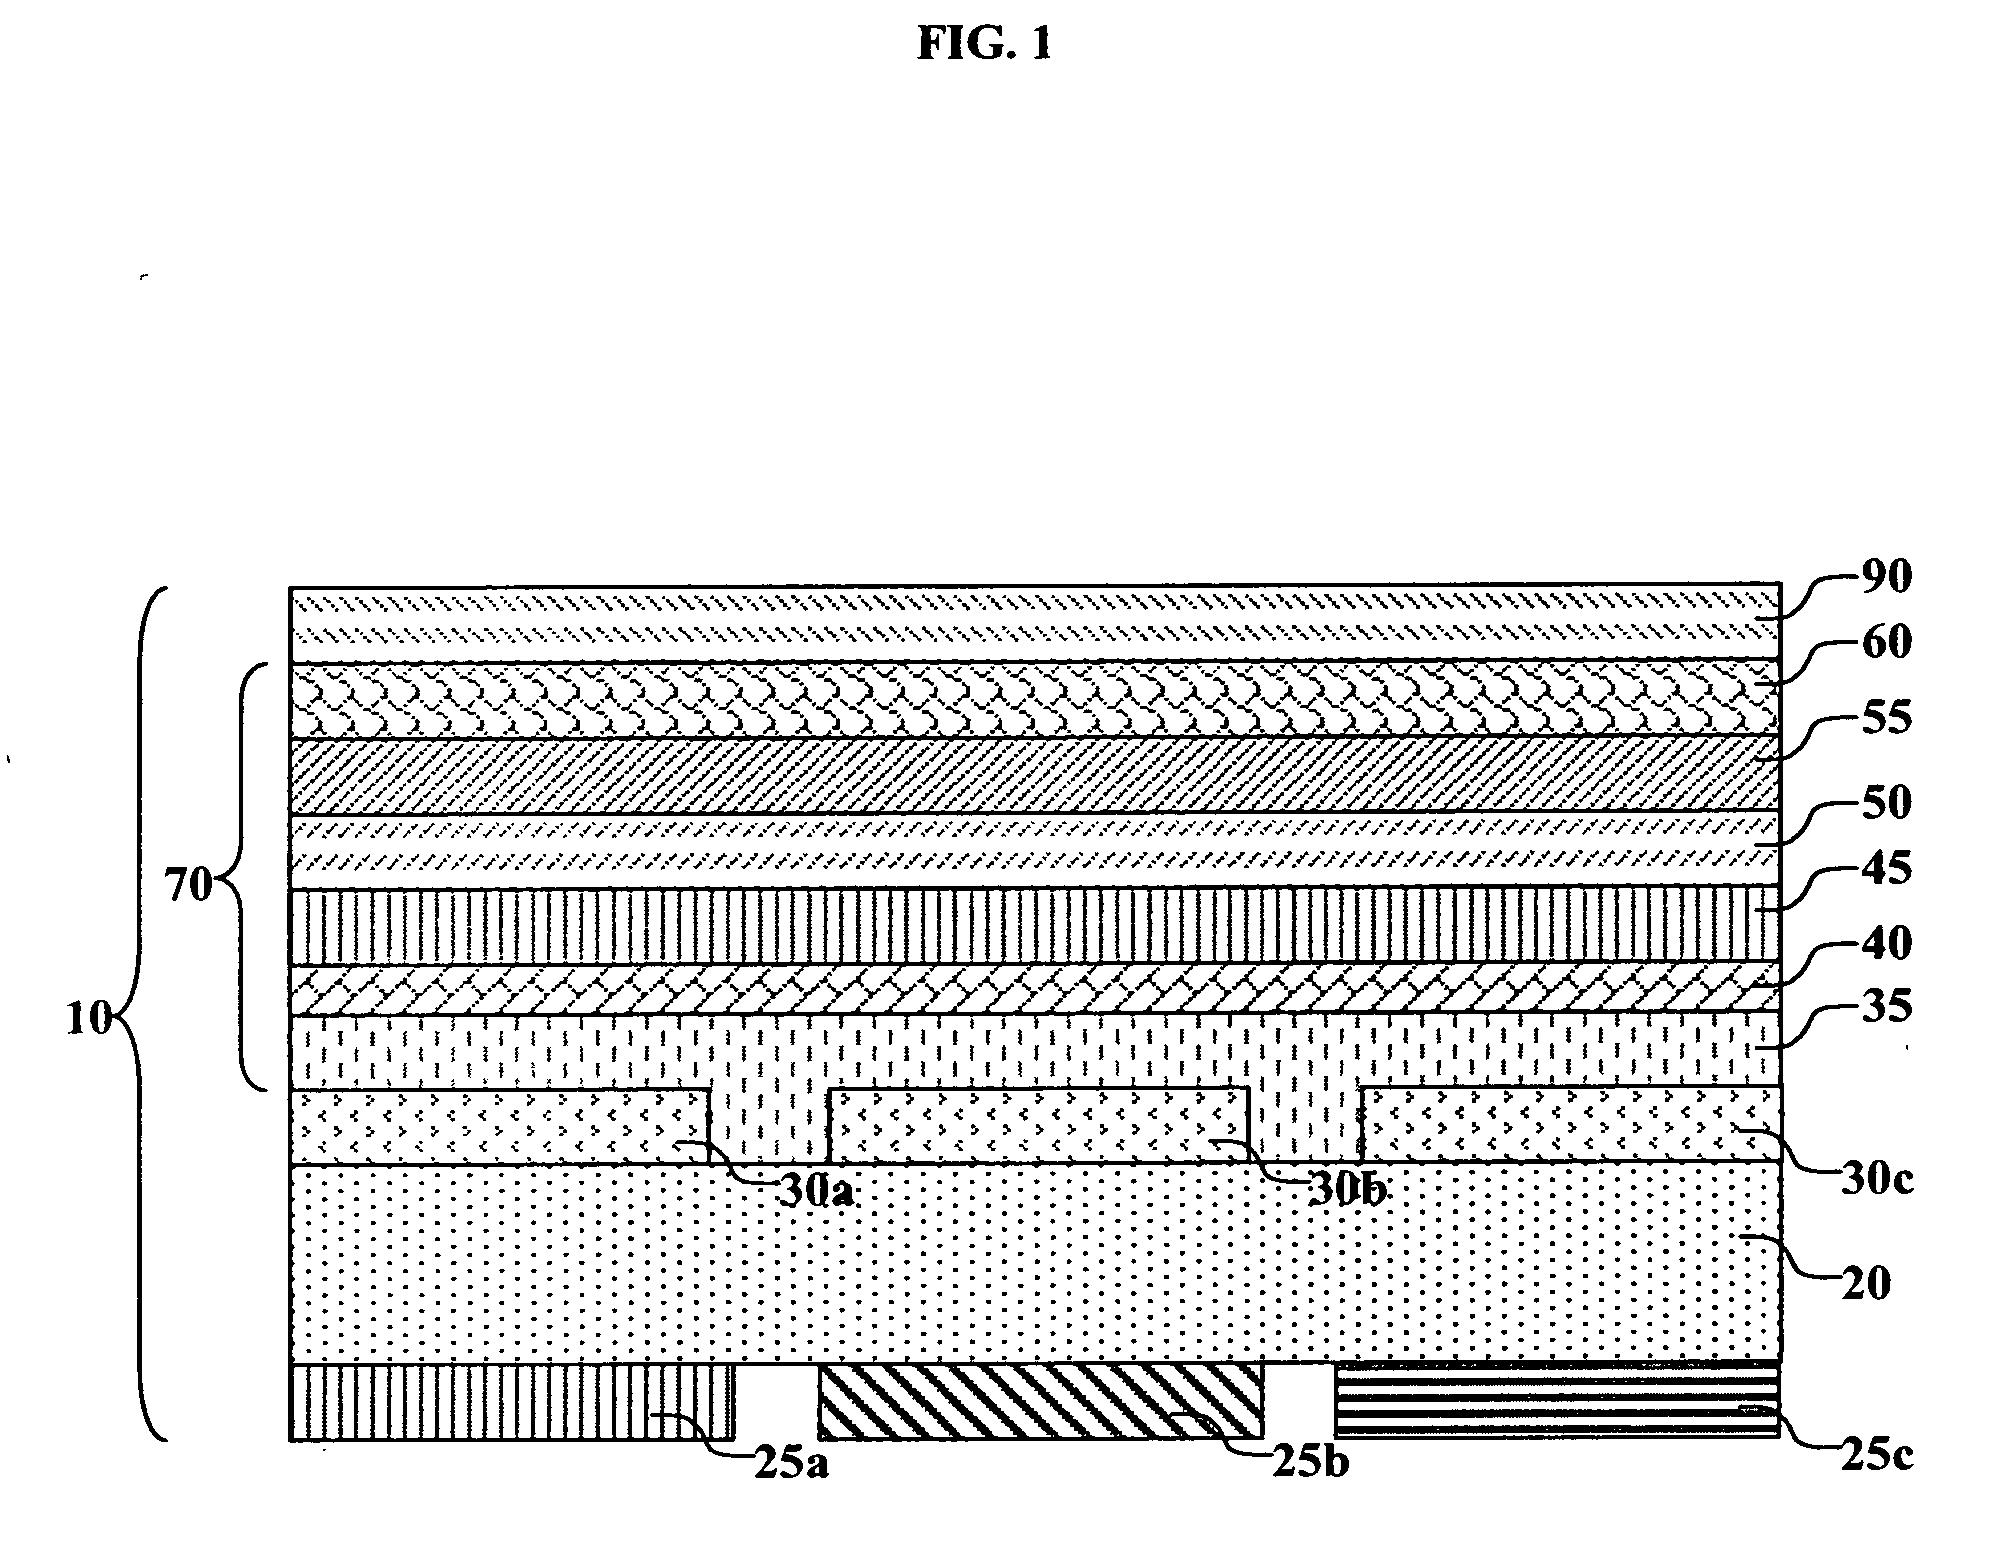 Method of making an OLED device